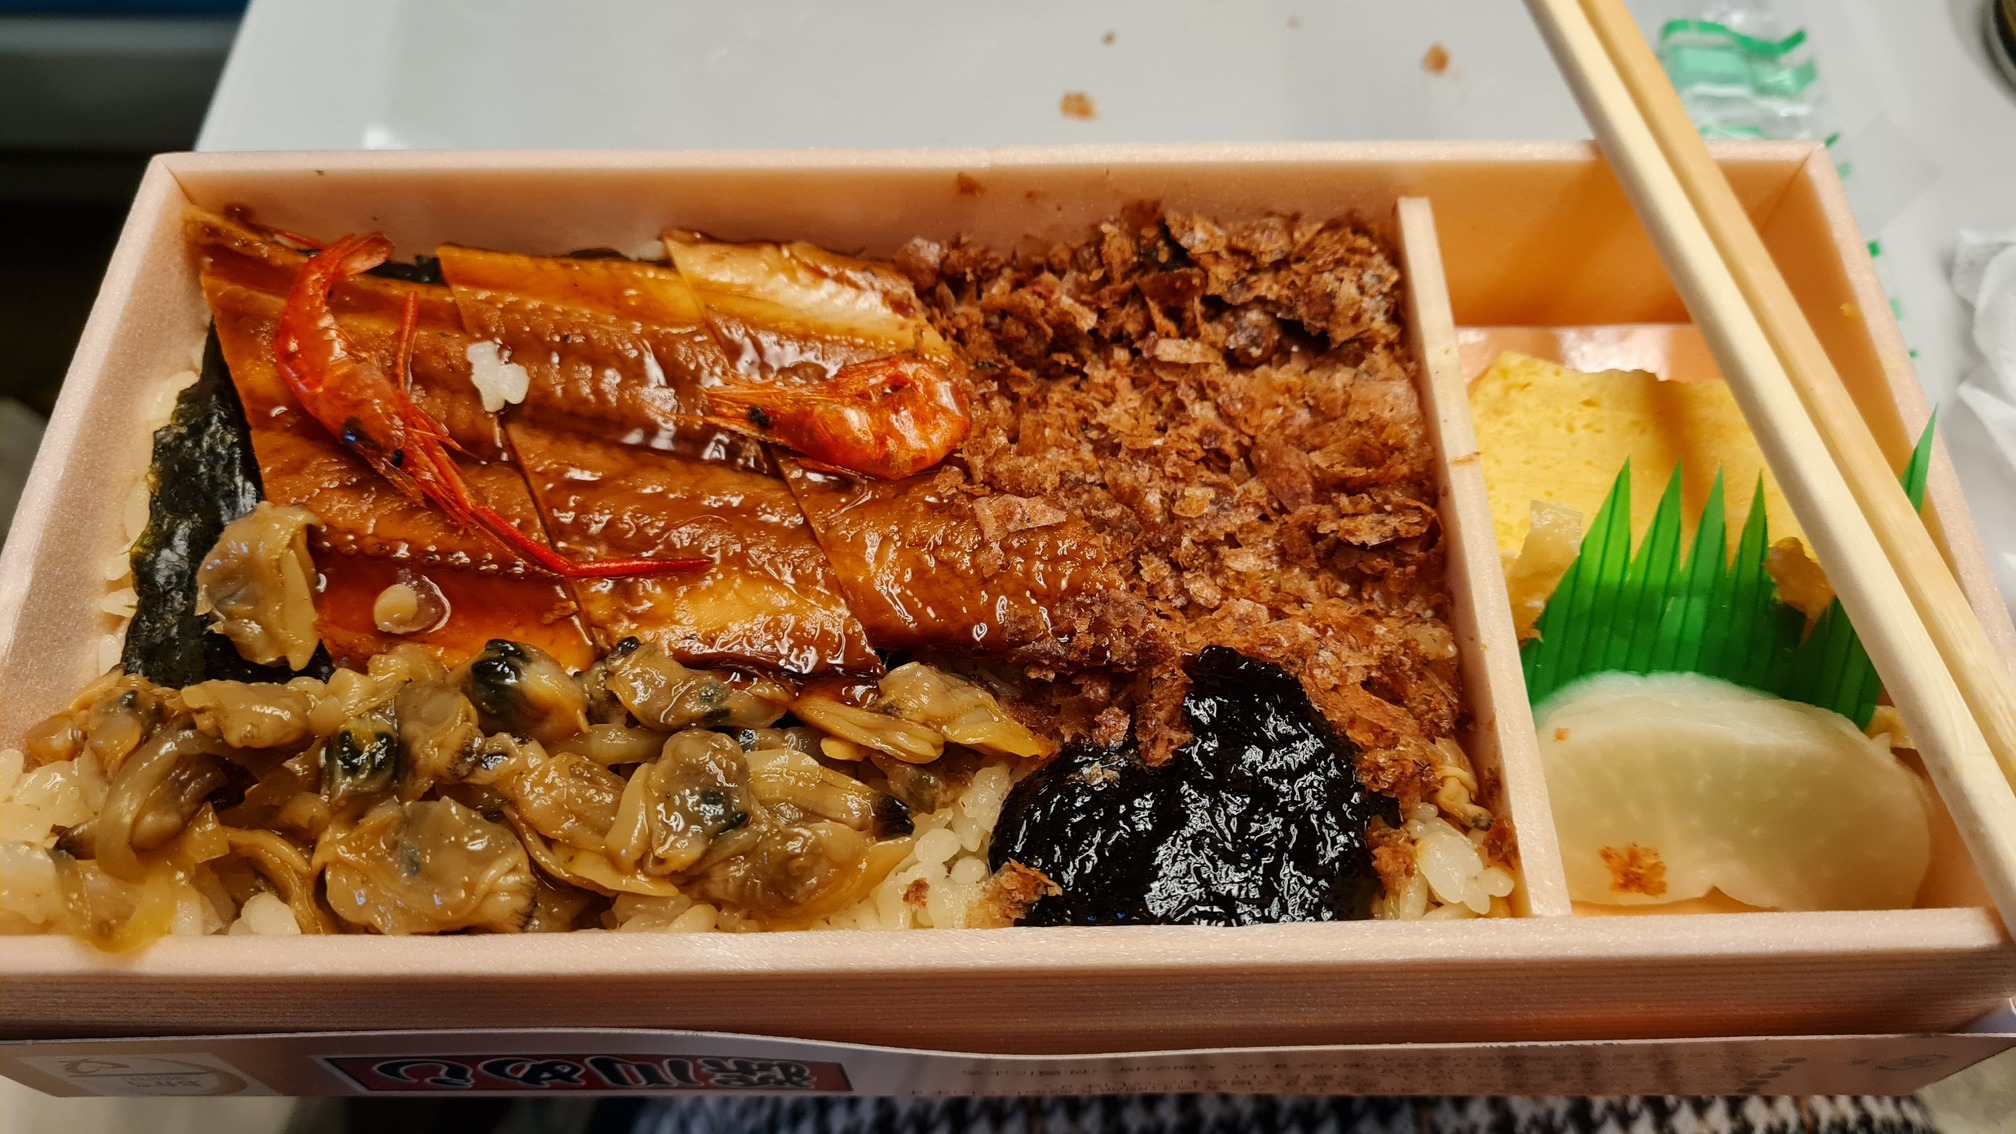 A train bento, or ekiben, that I bought at the station. Goodbye vegetarianism T_T